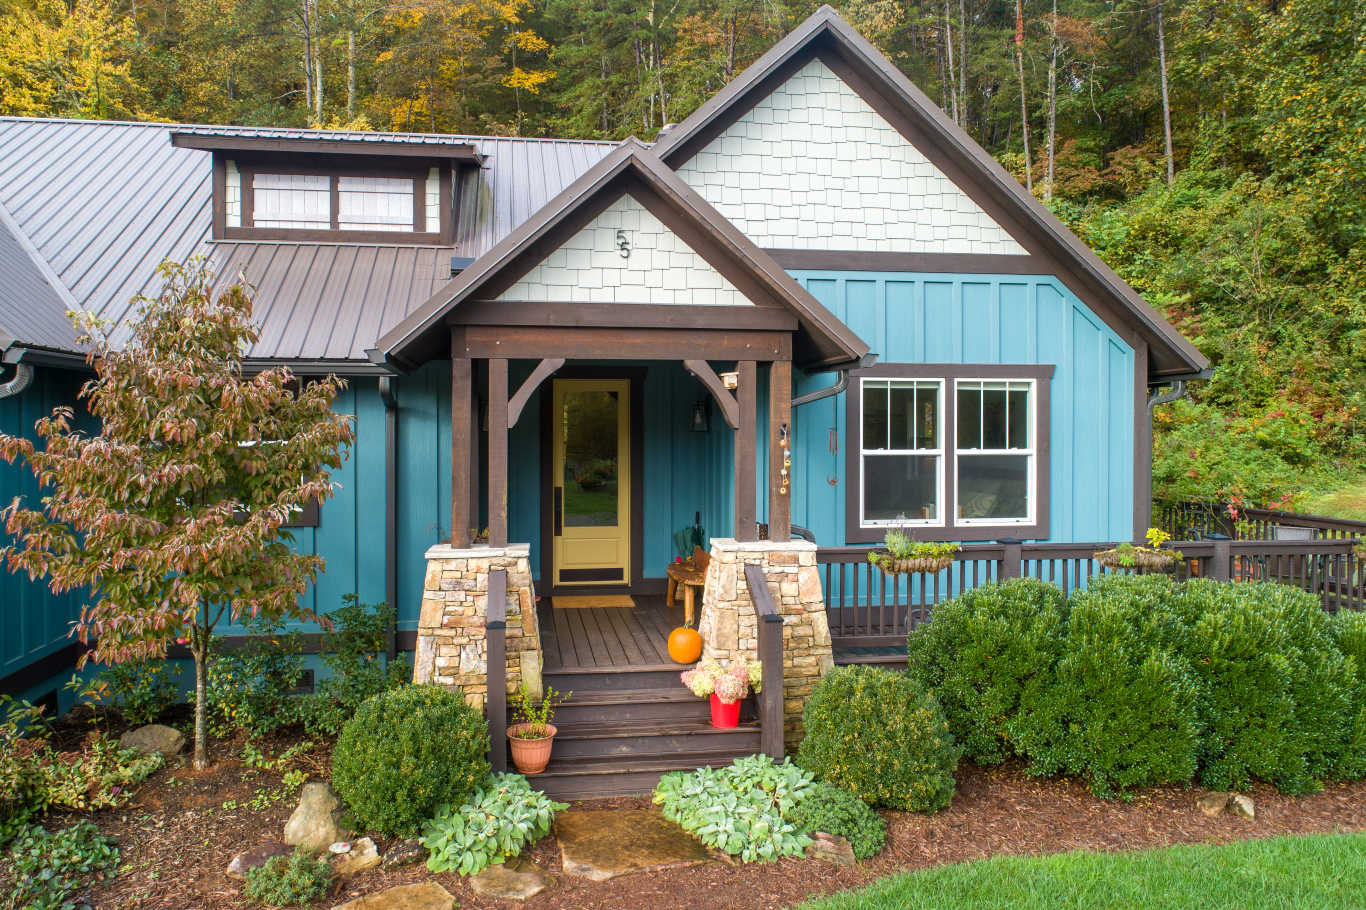 This Dog Series build in Cullowhee sports light blue paint with dark brown trim and decking.